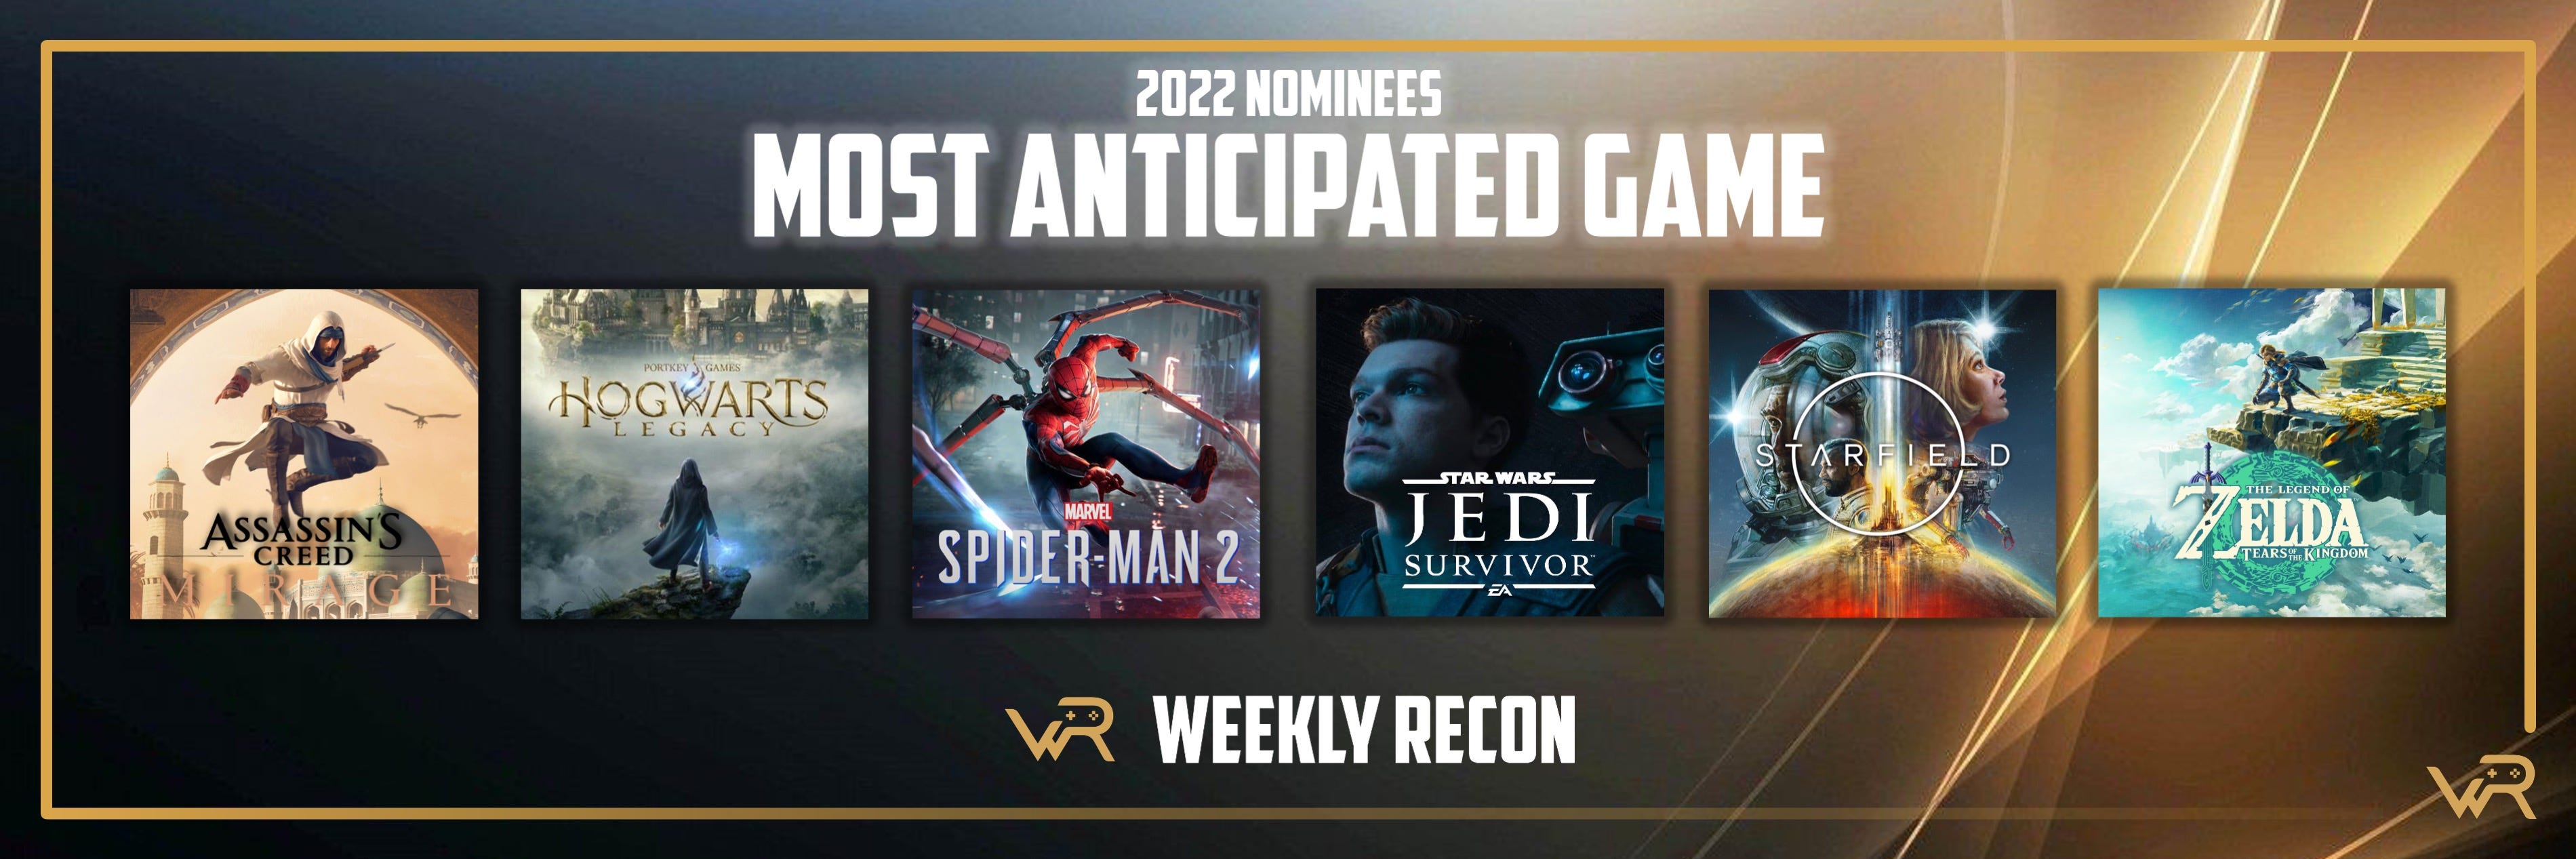 Most Anticipated Game, Nominees